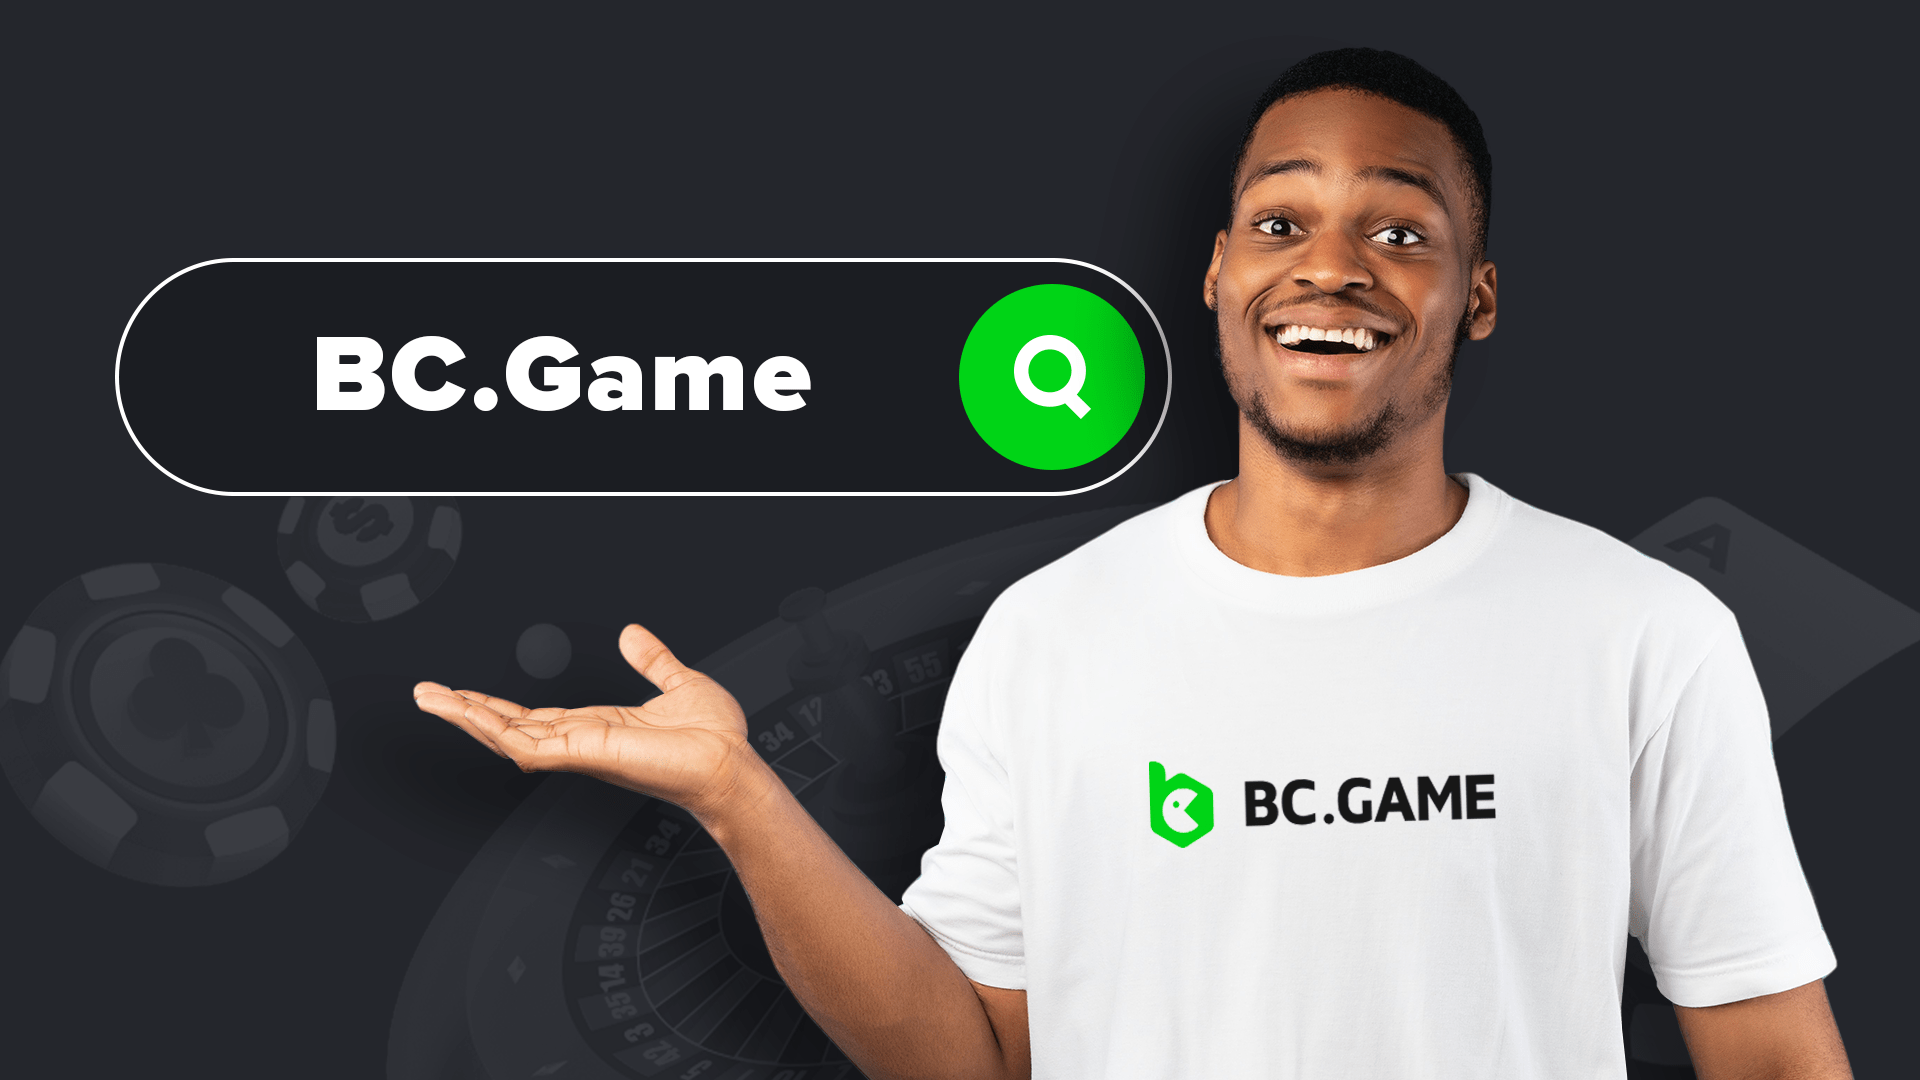 Where To Start With BC.Game kasino di Indonesia?